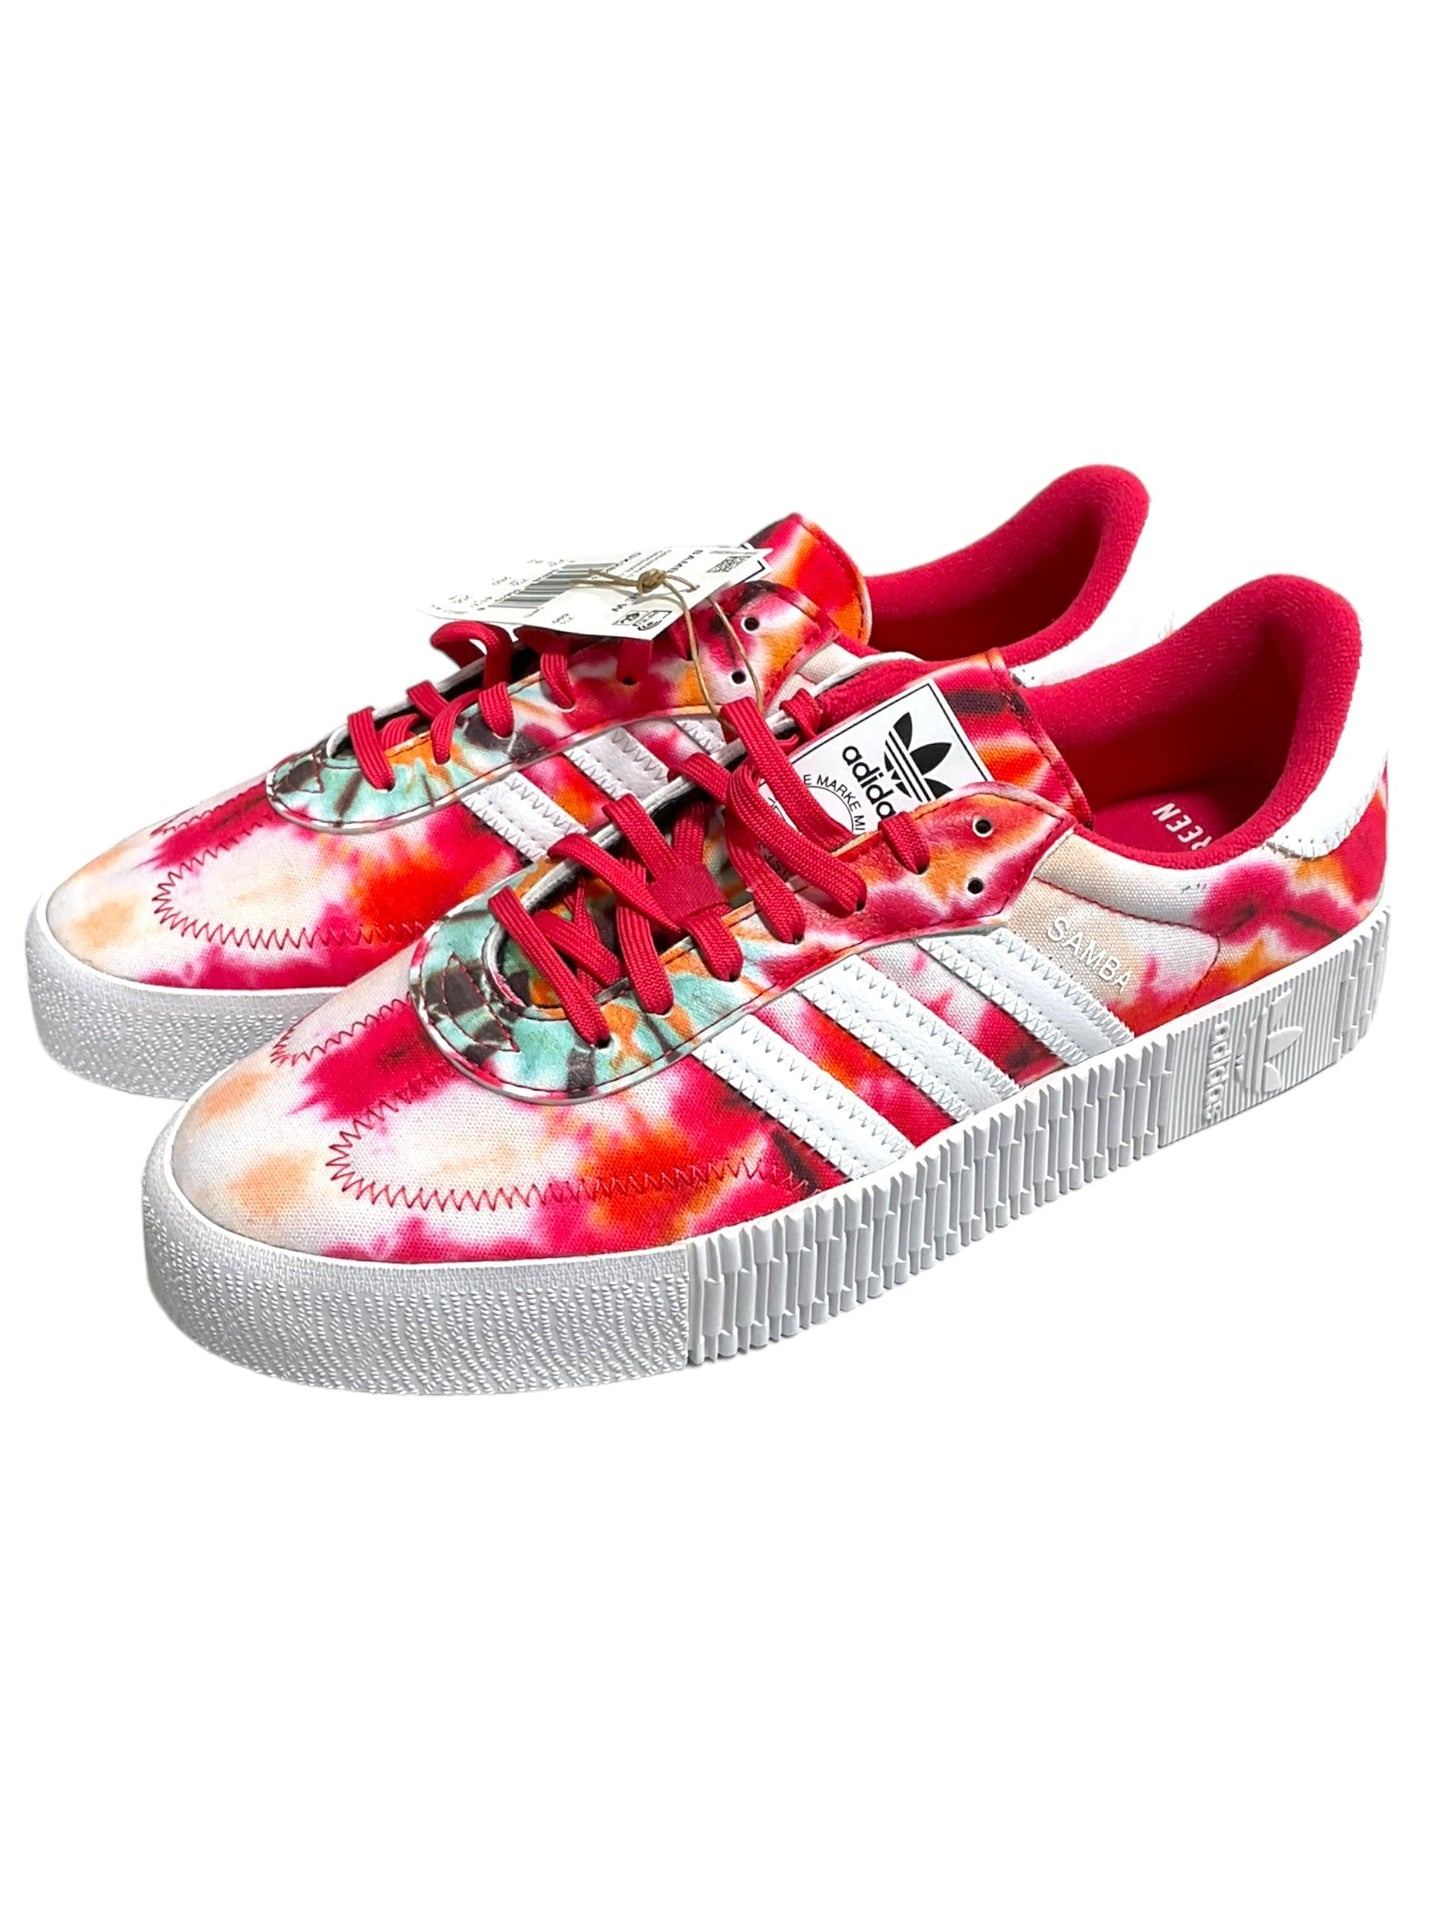 Tie Dye Print Shoes Athletic Adidas, Size 9